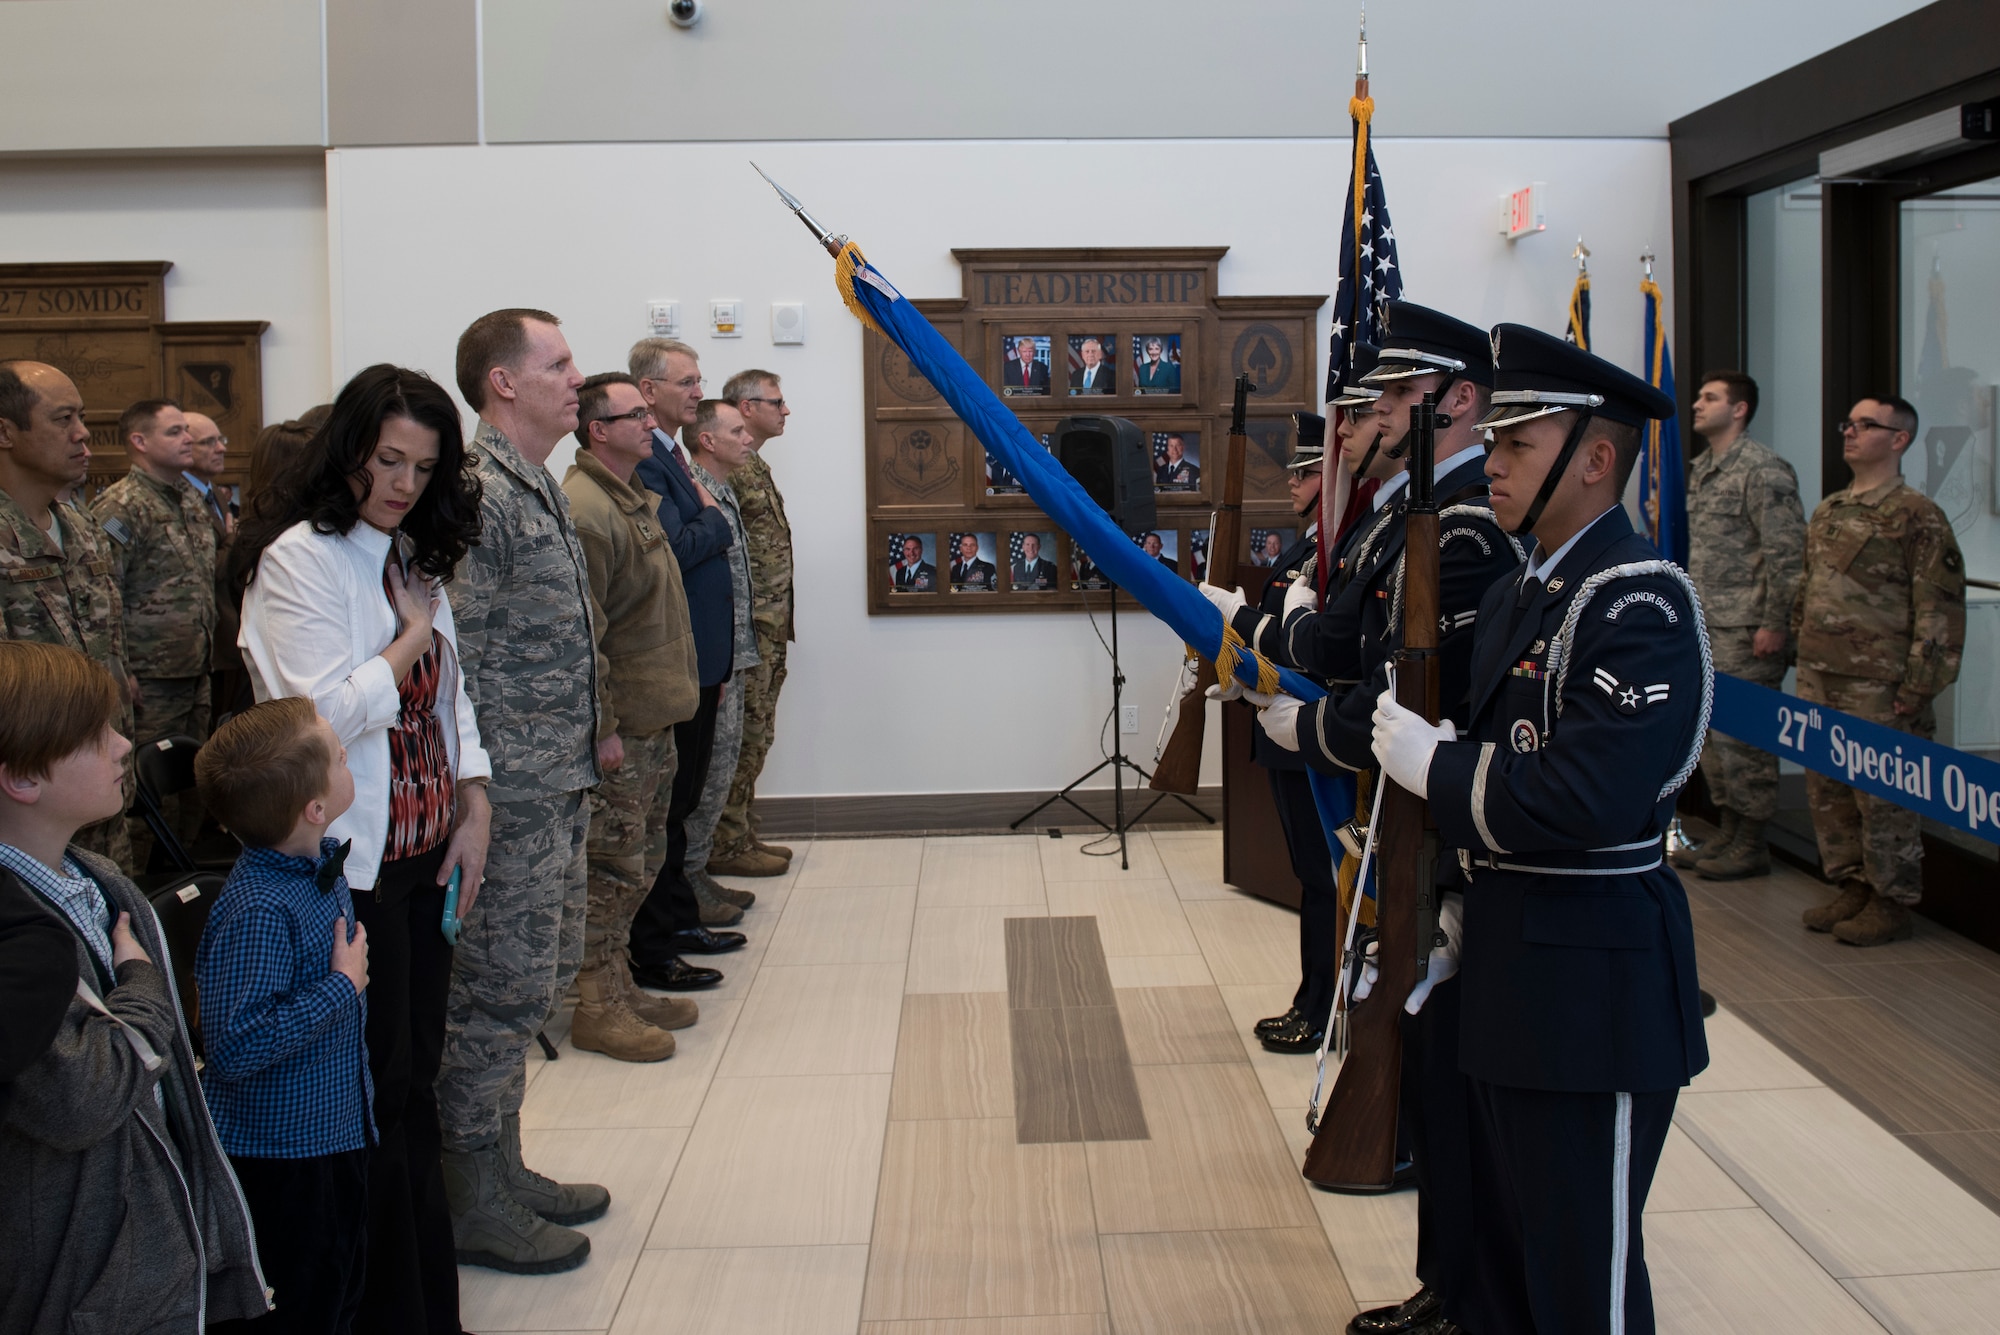 Cannon Air Force Base Honor Guard members present the colors during the 27th Special Operations Medical Group building ribbon cutting ceremony at Cannon AFB, N.M., Feb. 23, 2018. The layout of the new building was designed with patients in mind. Physical therapy and the pharmacy, both high-traffic areas, are located near the main entrance. (U.S. Air Force photo by Staff Sgt. Michael Washburn/Released)